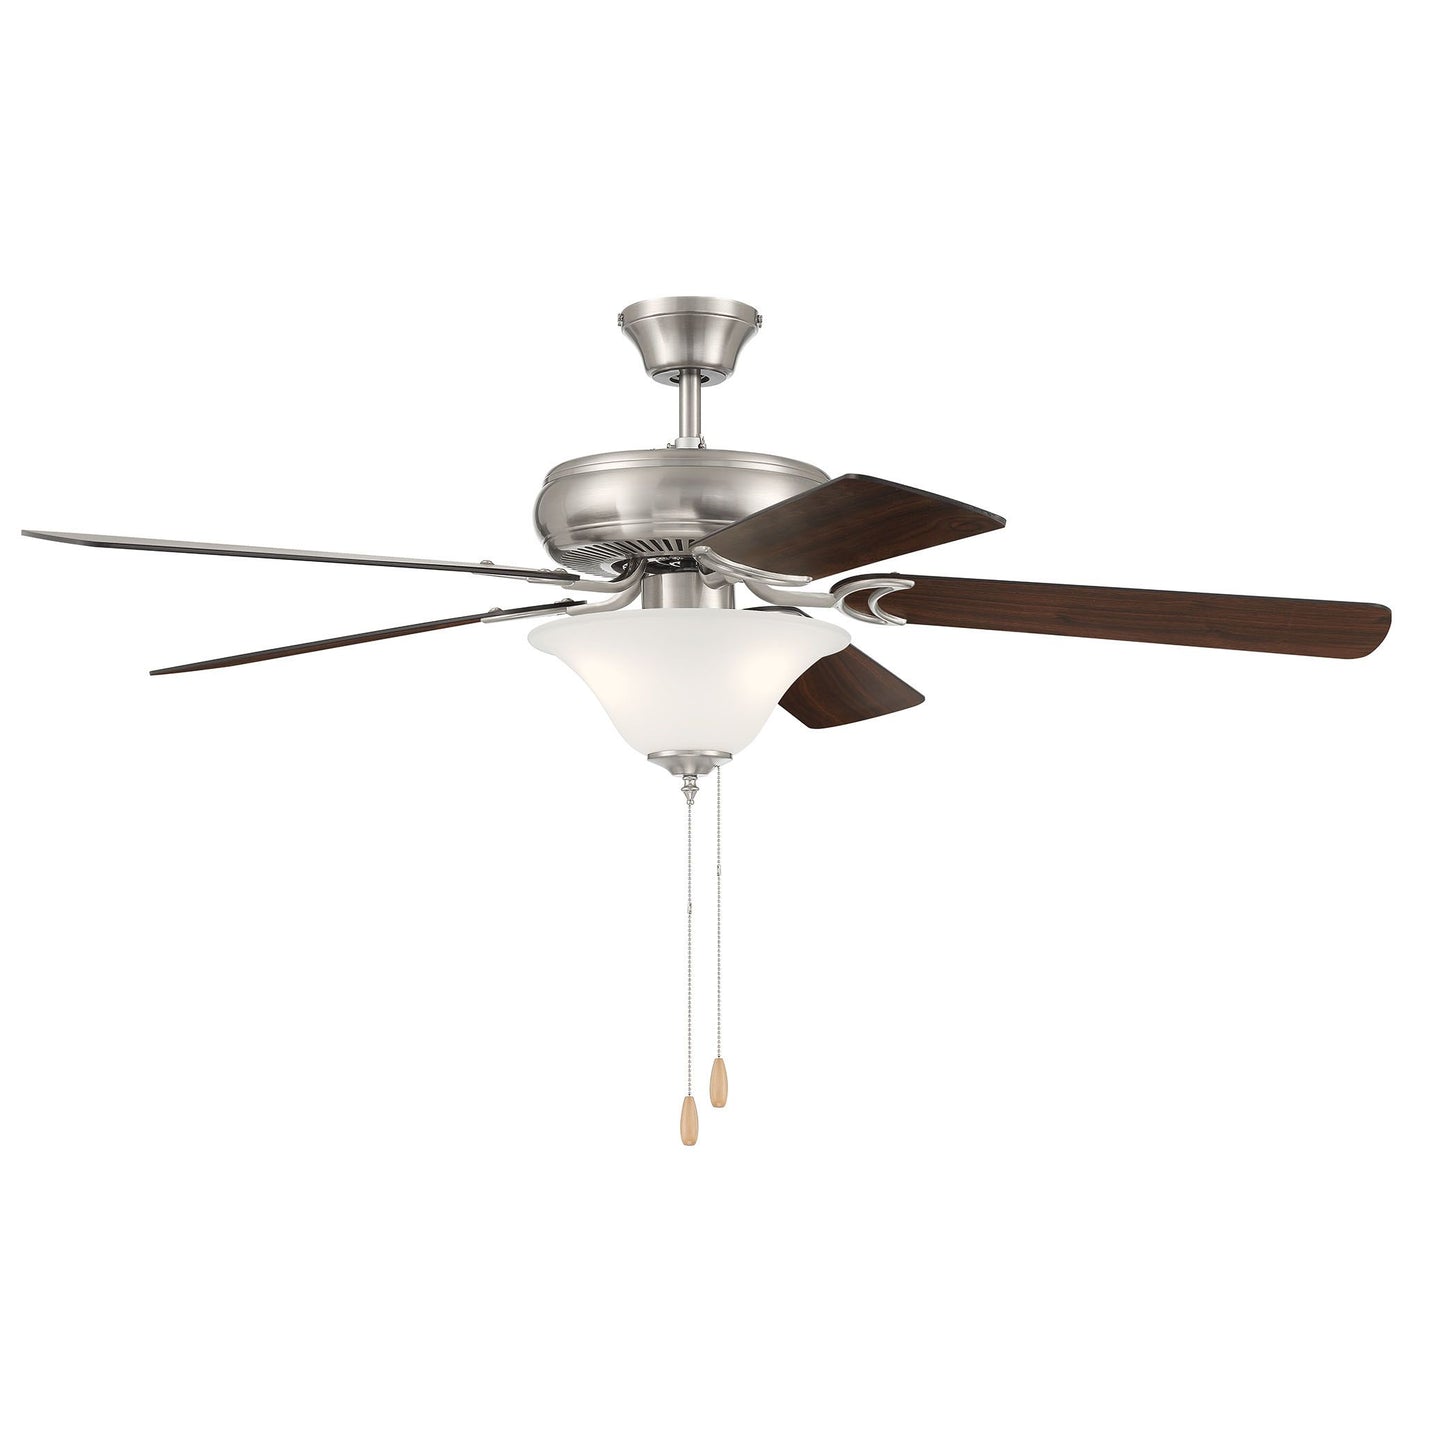 DCF52BNK5C1W - Decorator's Choice 52" 5 Blade Ceiling Fan with Light Kit - Pull Chain - Brushed Poli